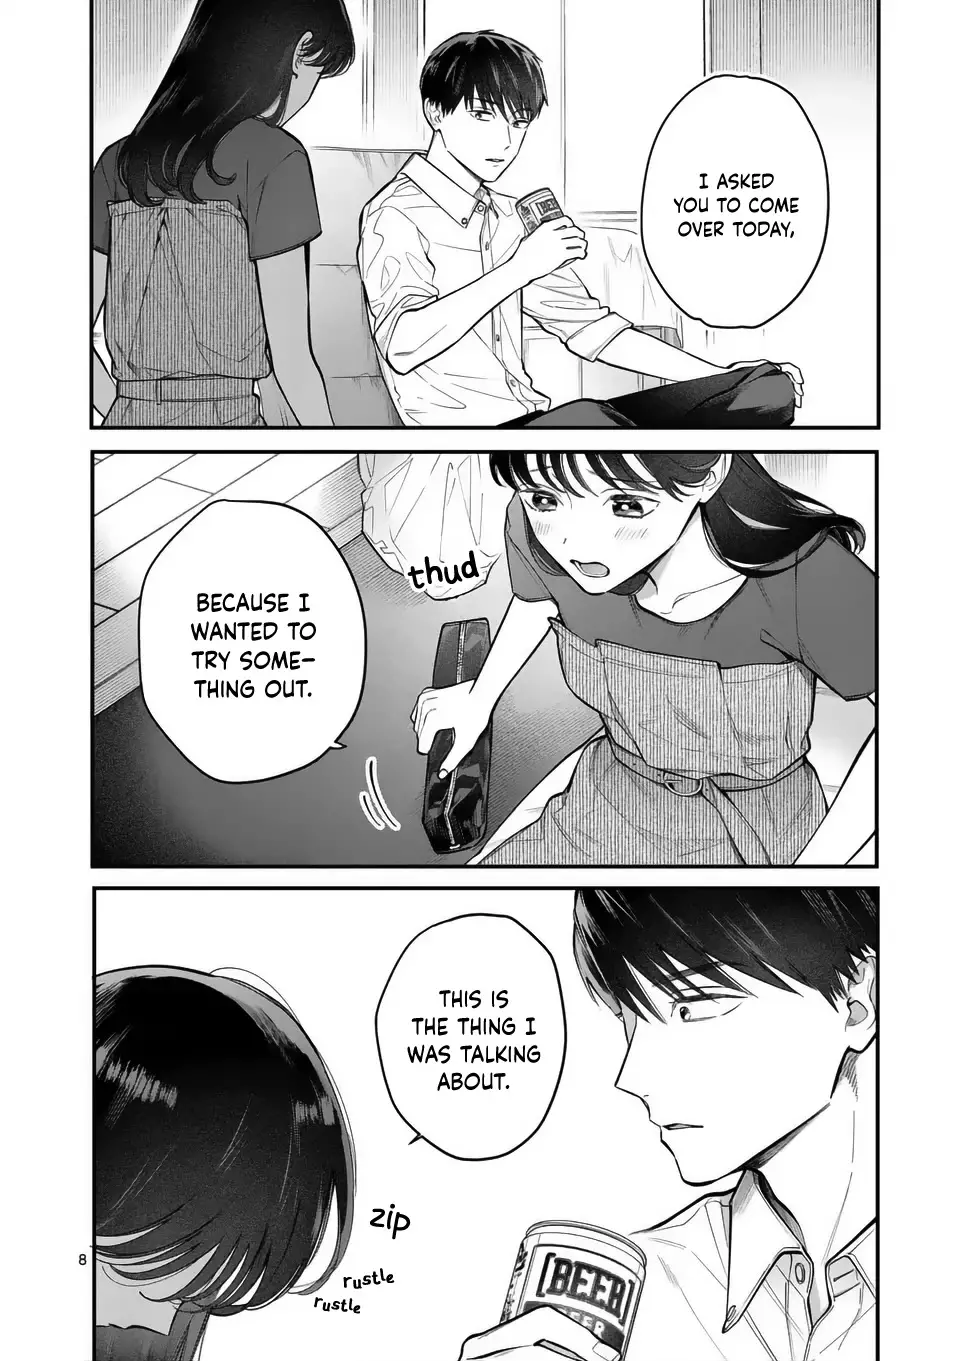 Is It Wrong To Get Done By A Girl? - 7 page 9